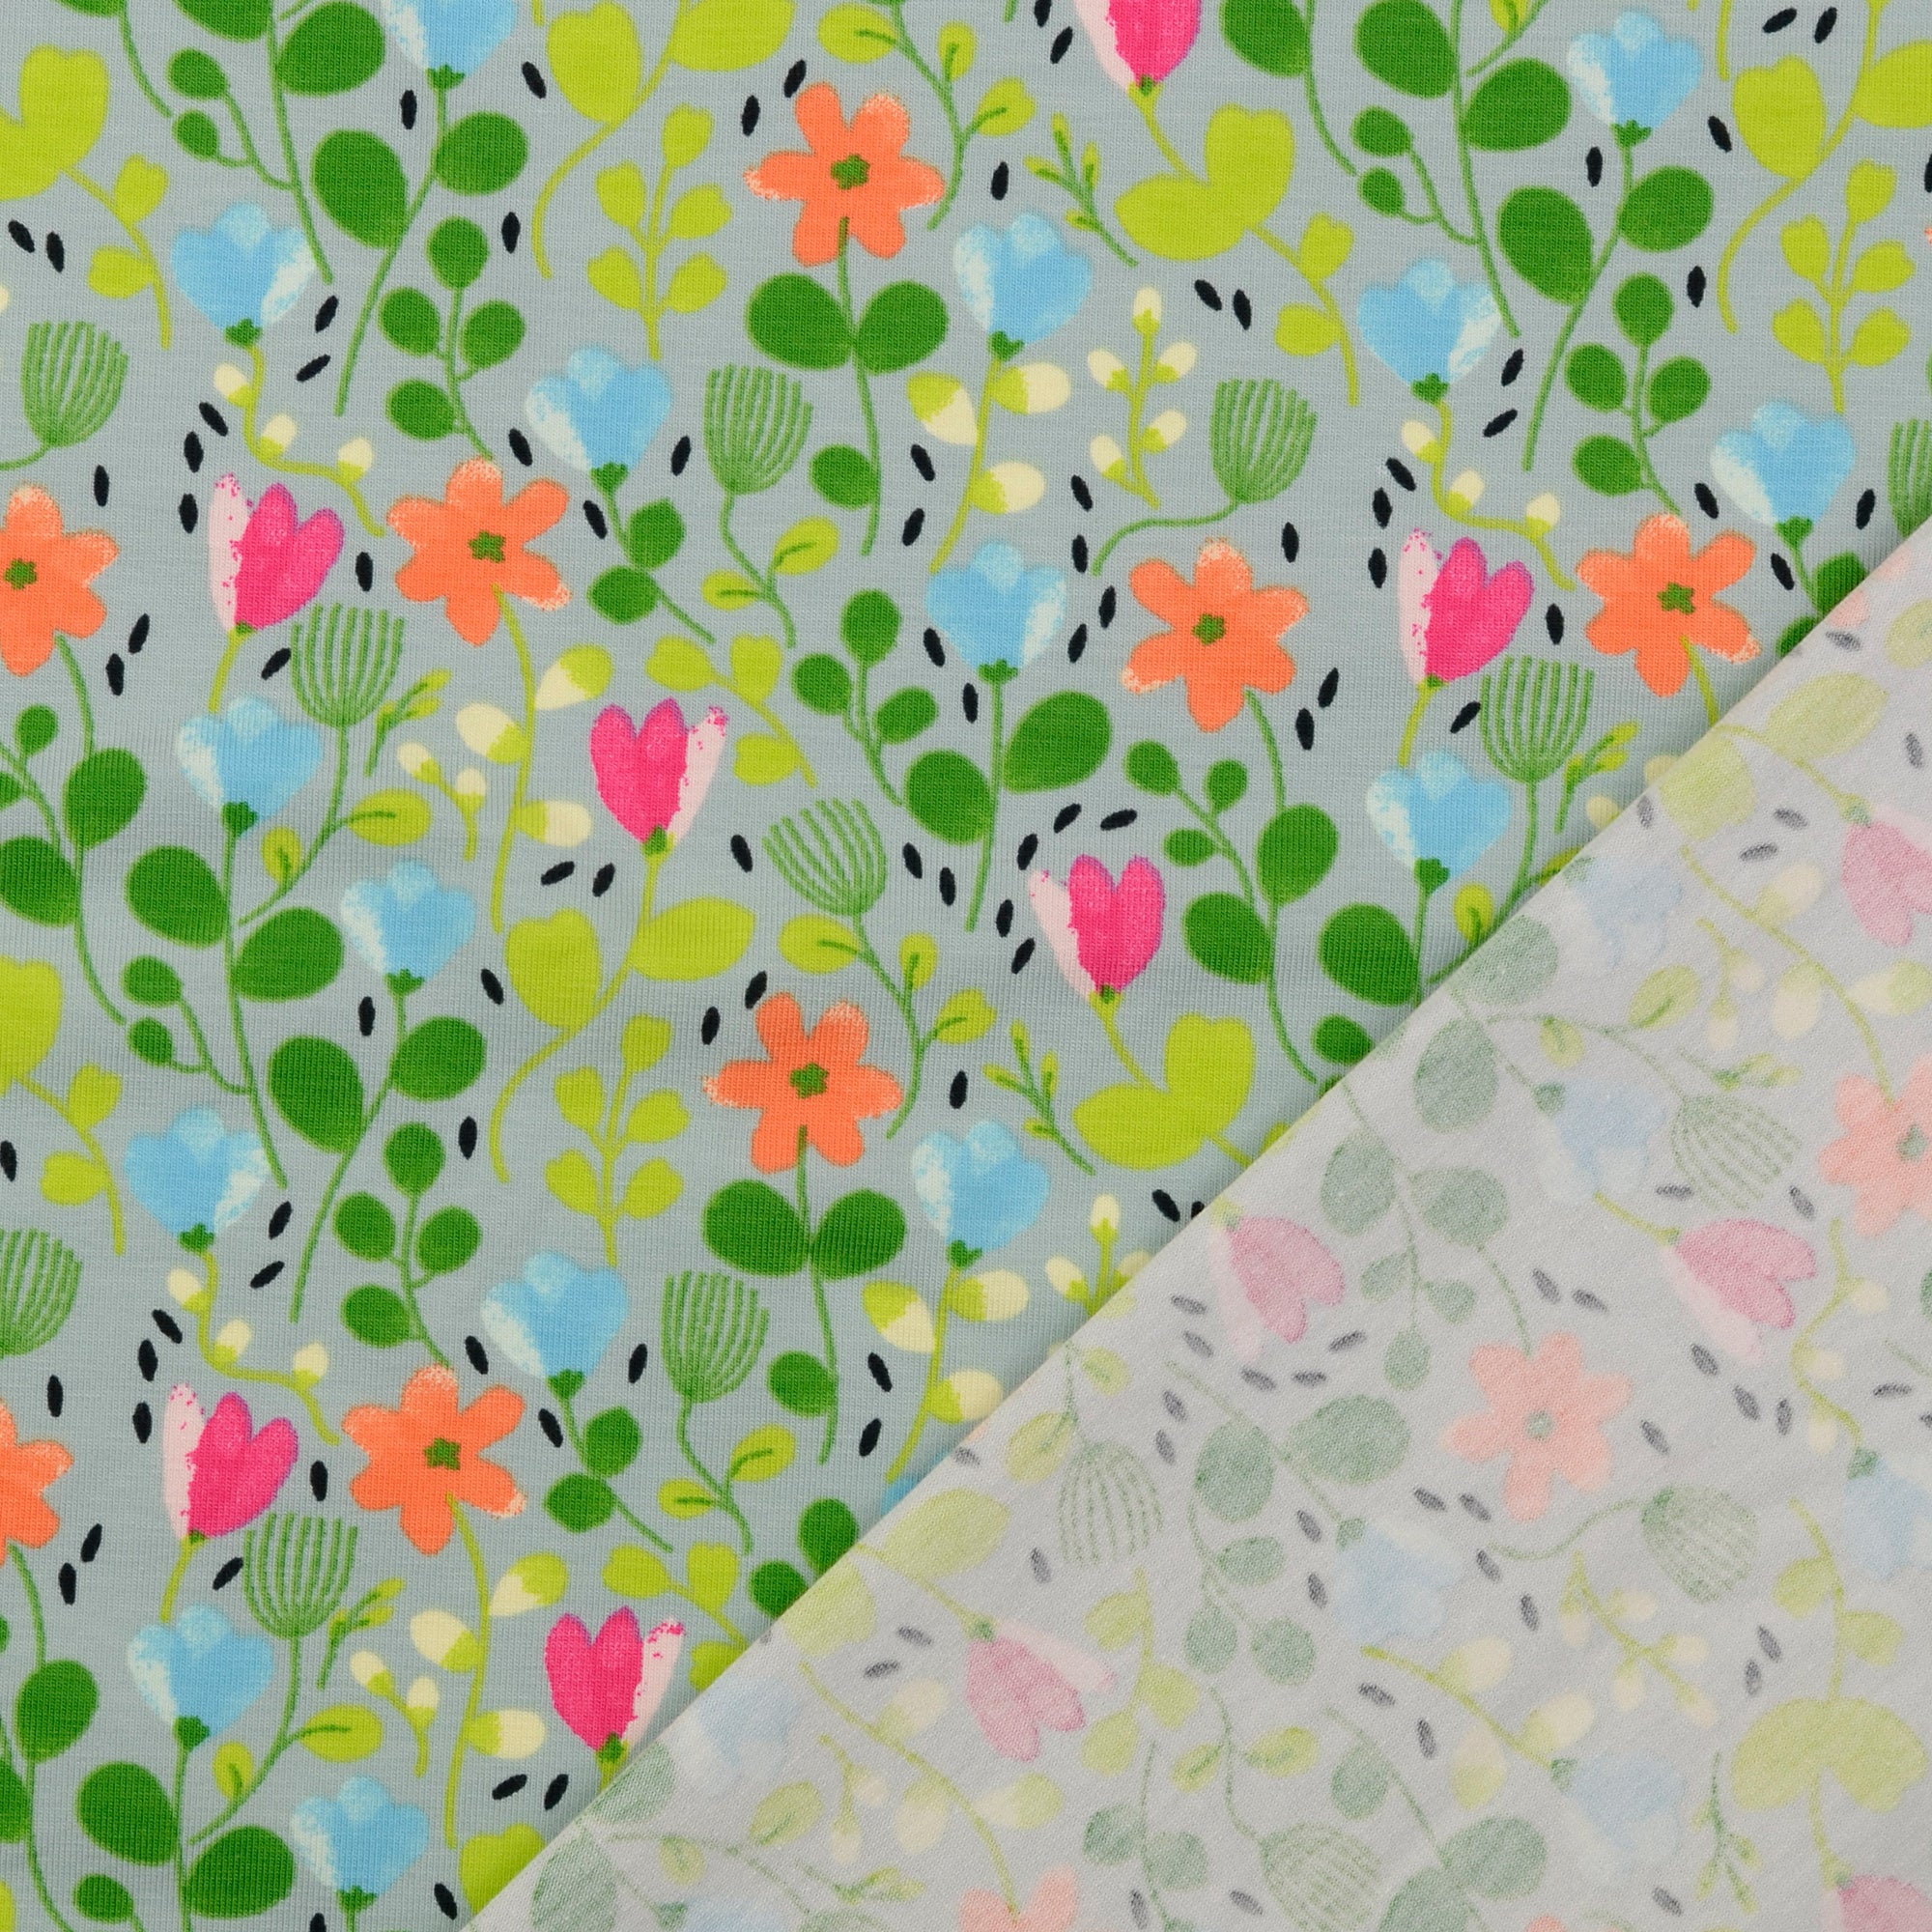 REMNANT 1.79 Metres - Summer Flowers Green Cotton Jersey Fabric